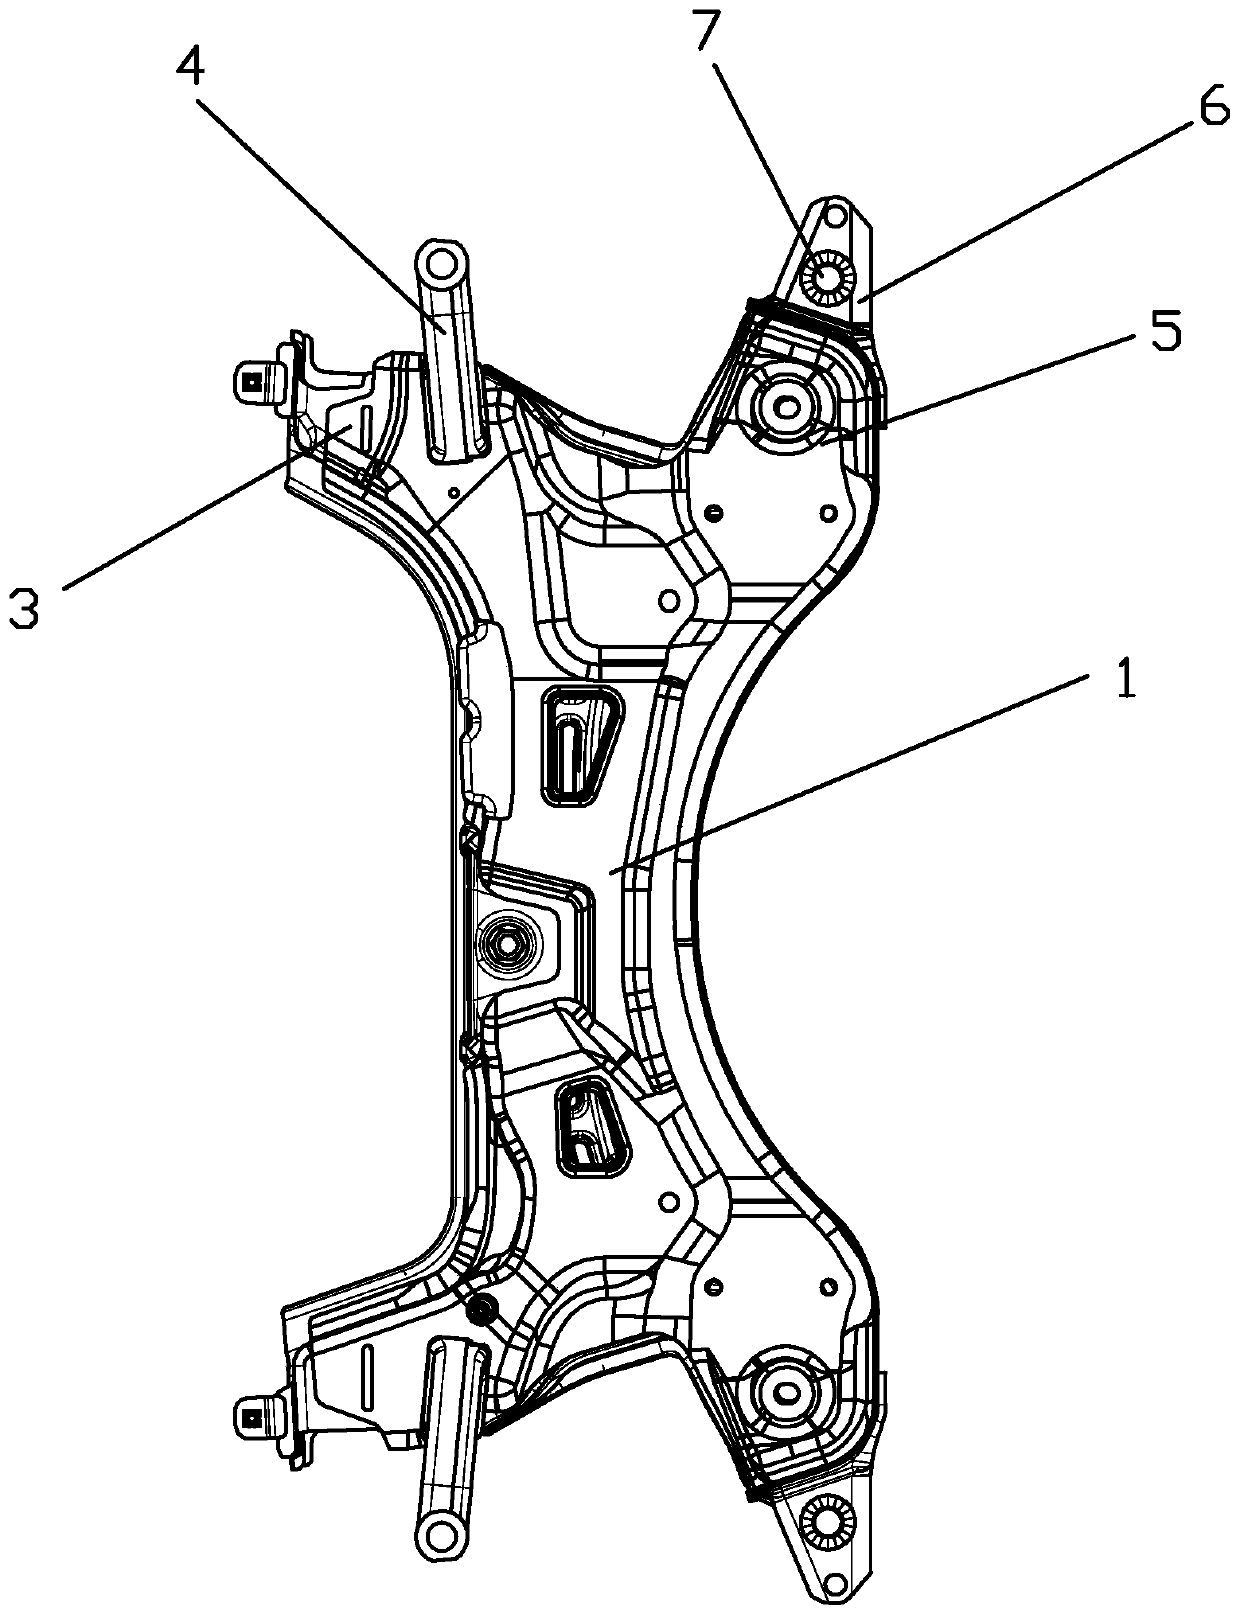 Automobile front subframe assembly